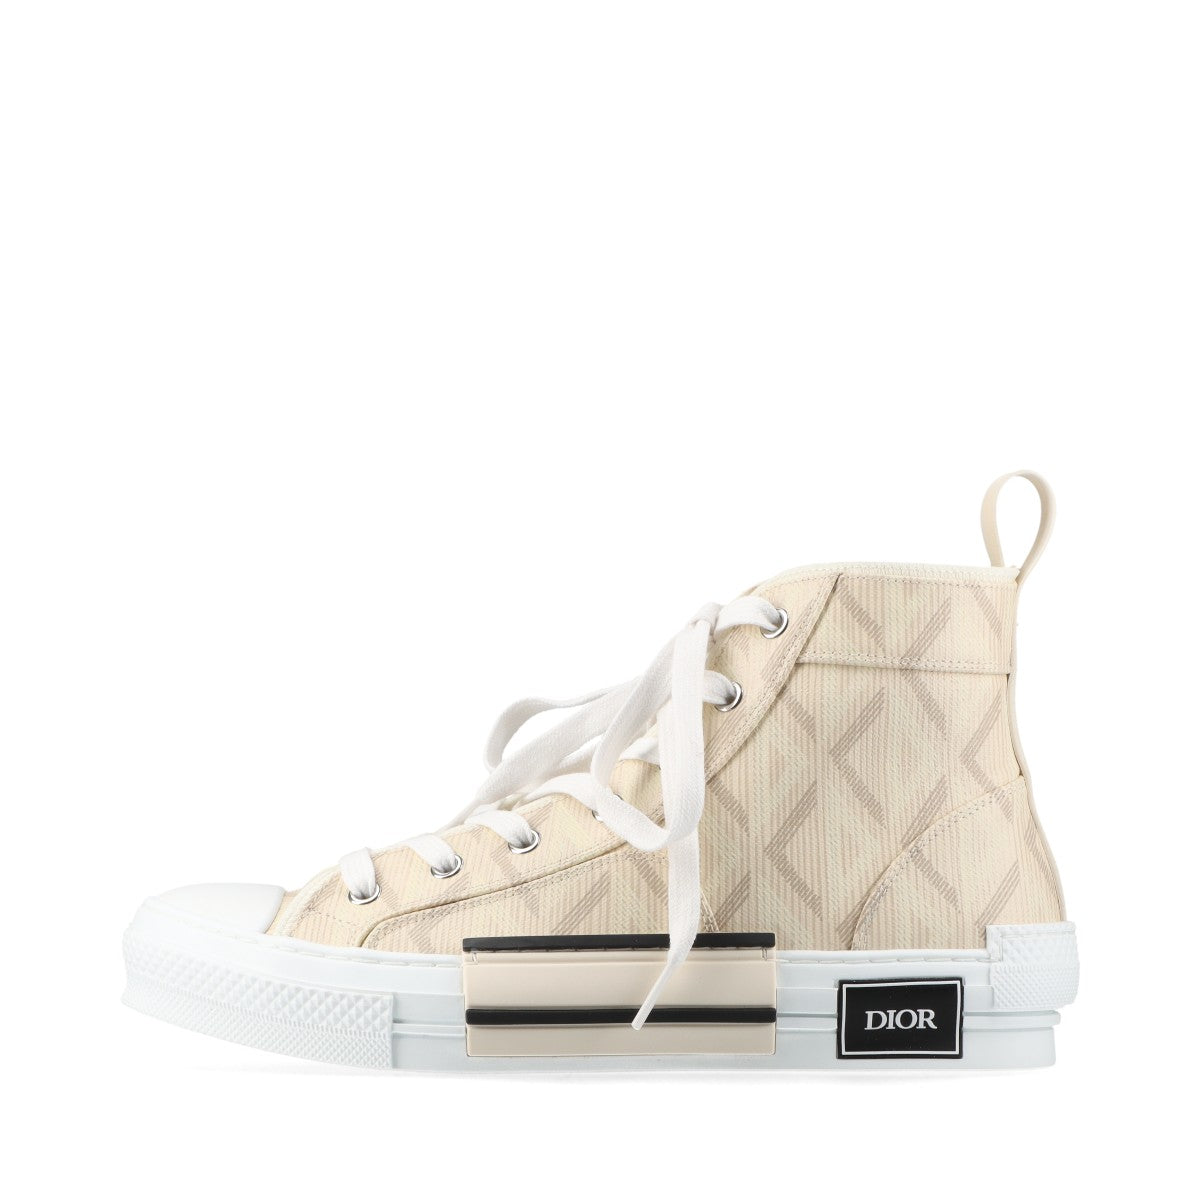 DIOR B23 22AW PVC & leather High-top Sneakers 40 Men's Beige x ivory LS0322 CD diamond Replaceable cord box There is a storage bag